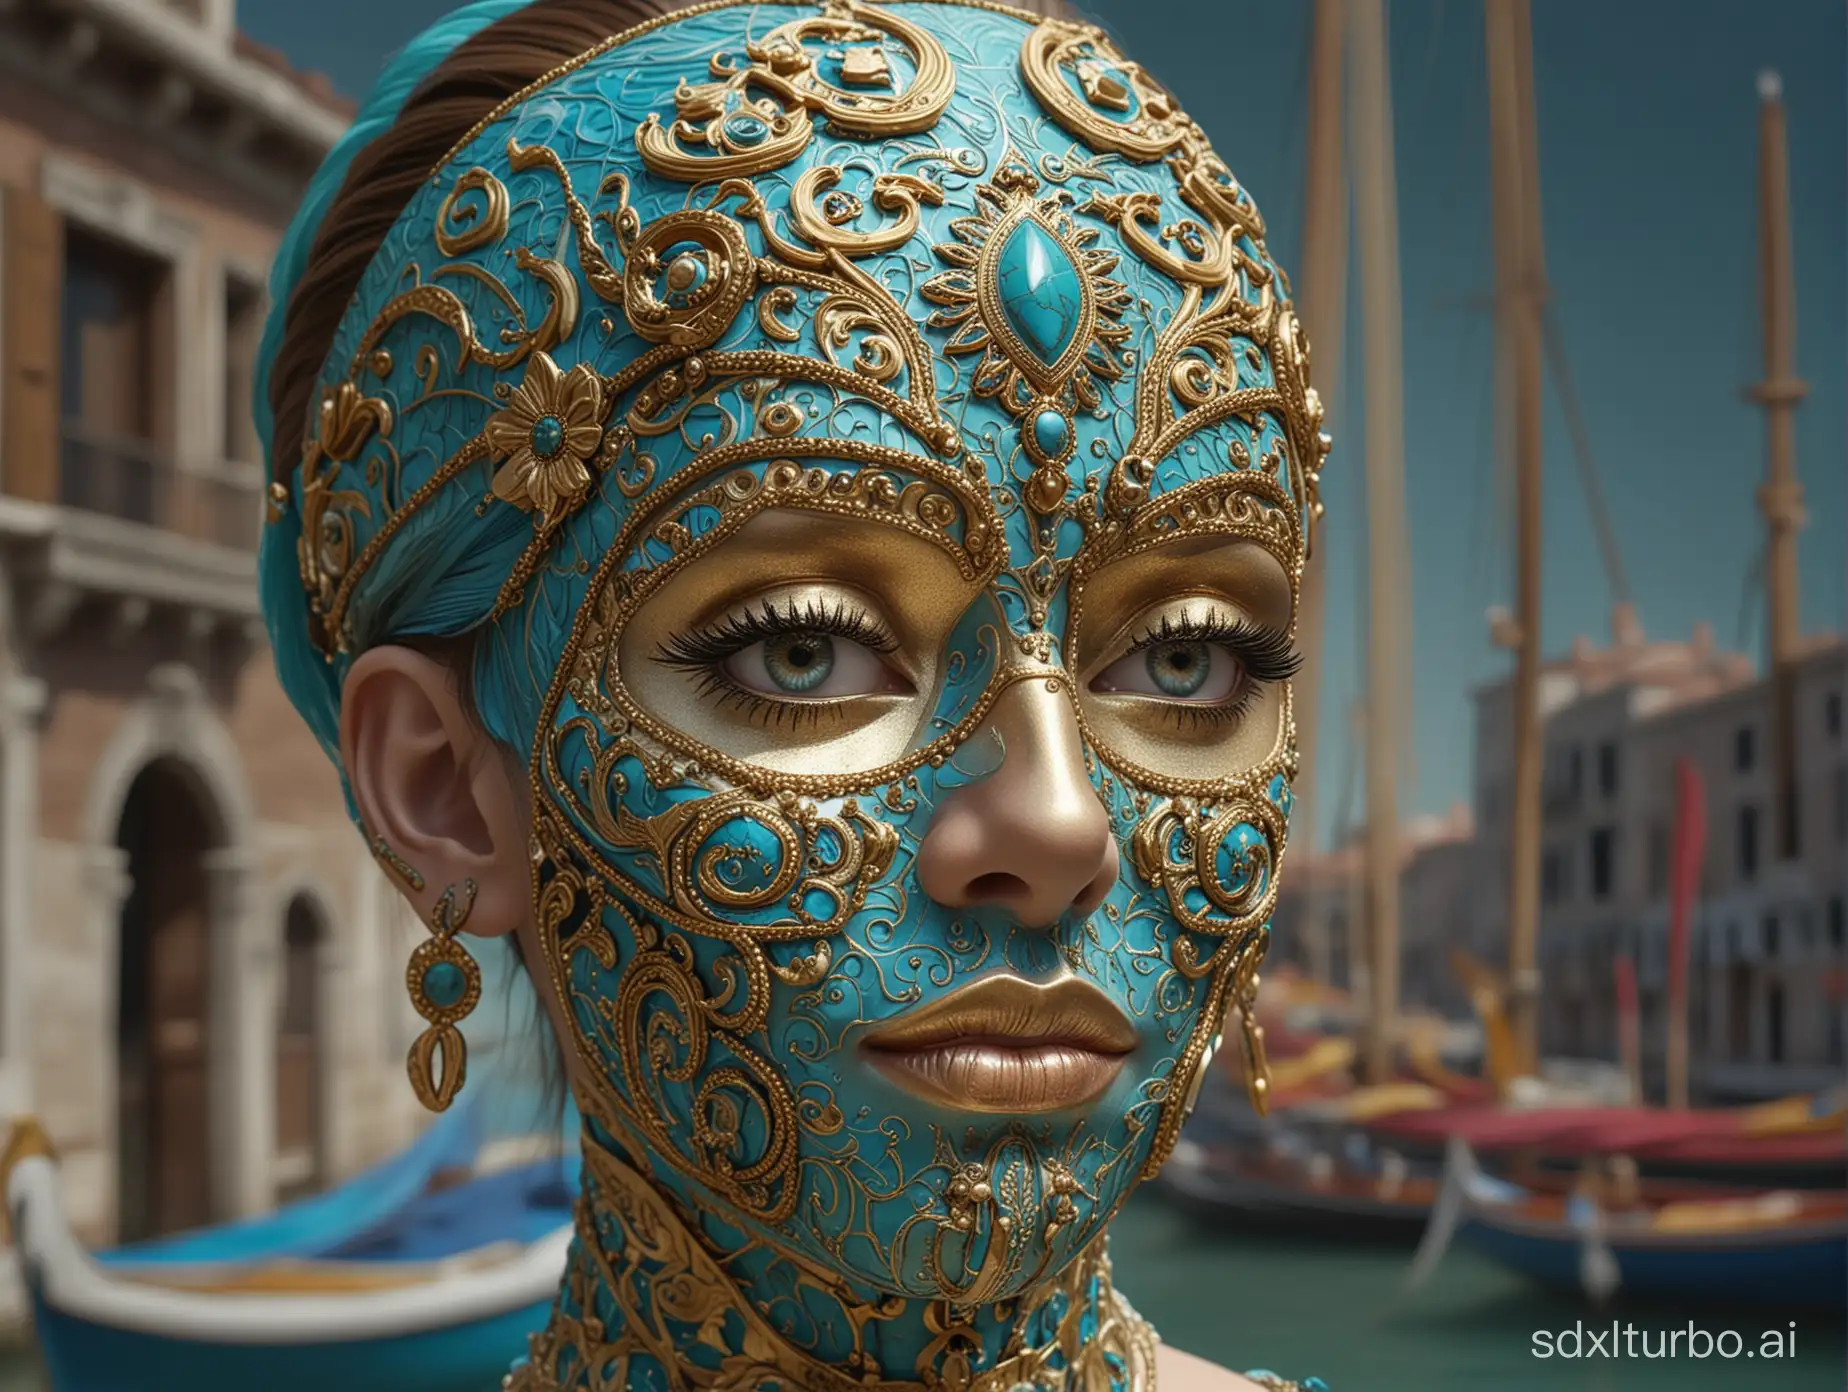 Leo Messi wearing an elaborate mask around her face, in the style of Vray tracing, cloisonnism, turquoise and gold, miniature sculptures, impressionistic Venice scenes, realistic fantasy artwork, exquisite detail --ar 35:64 --stylize 750 --v 6